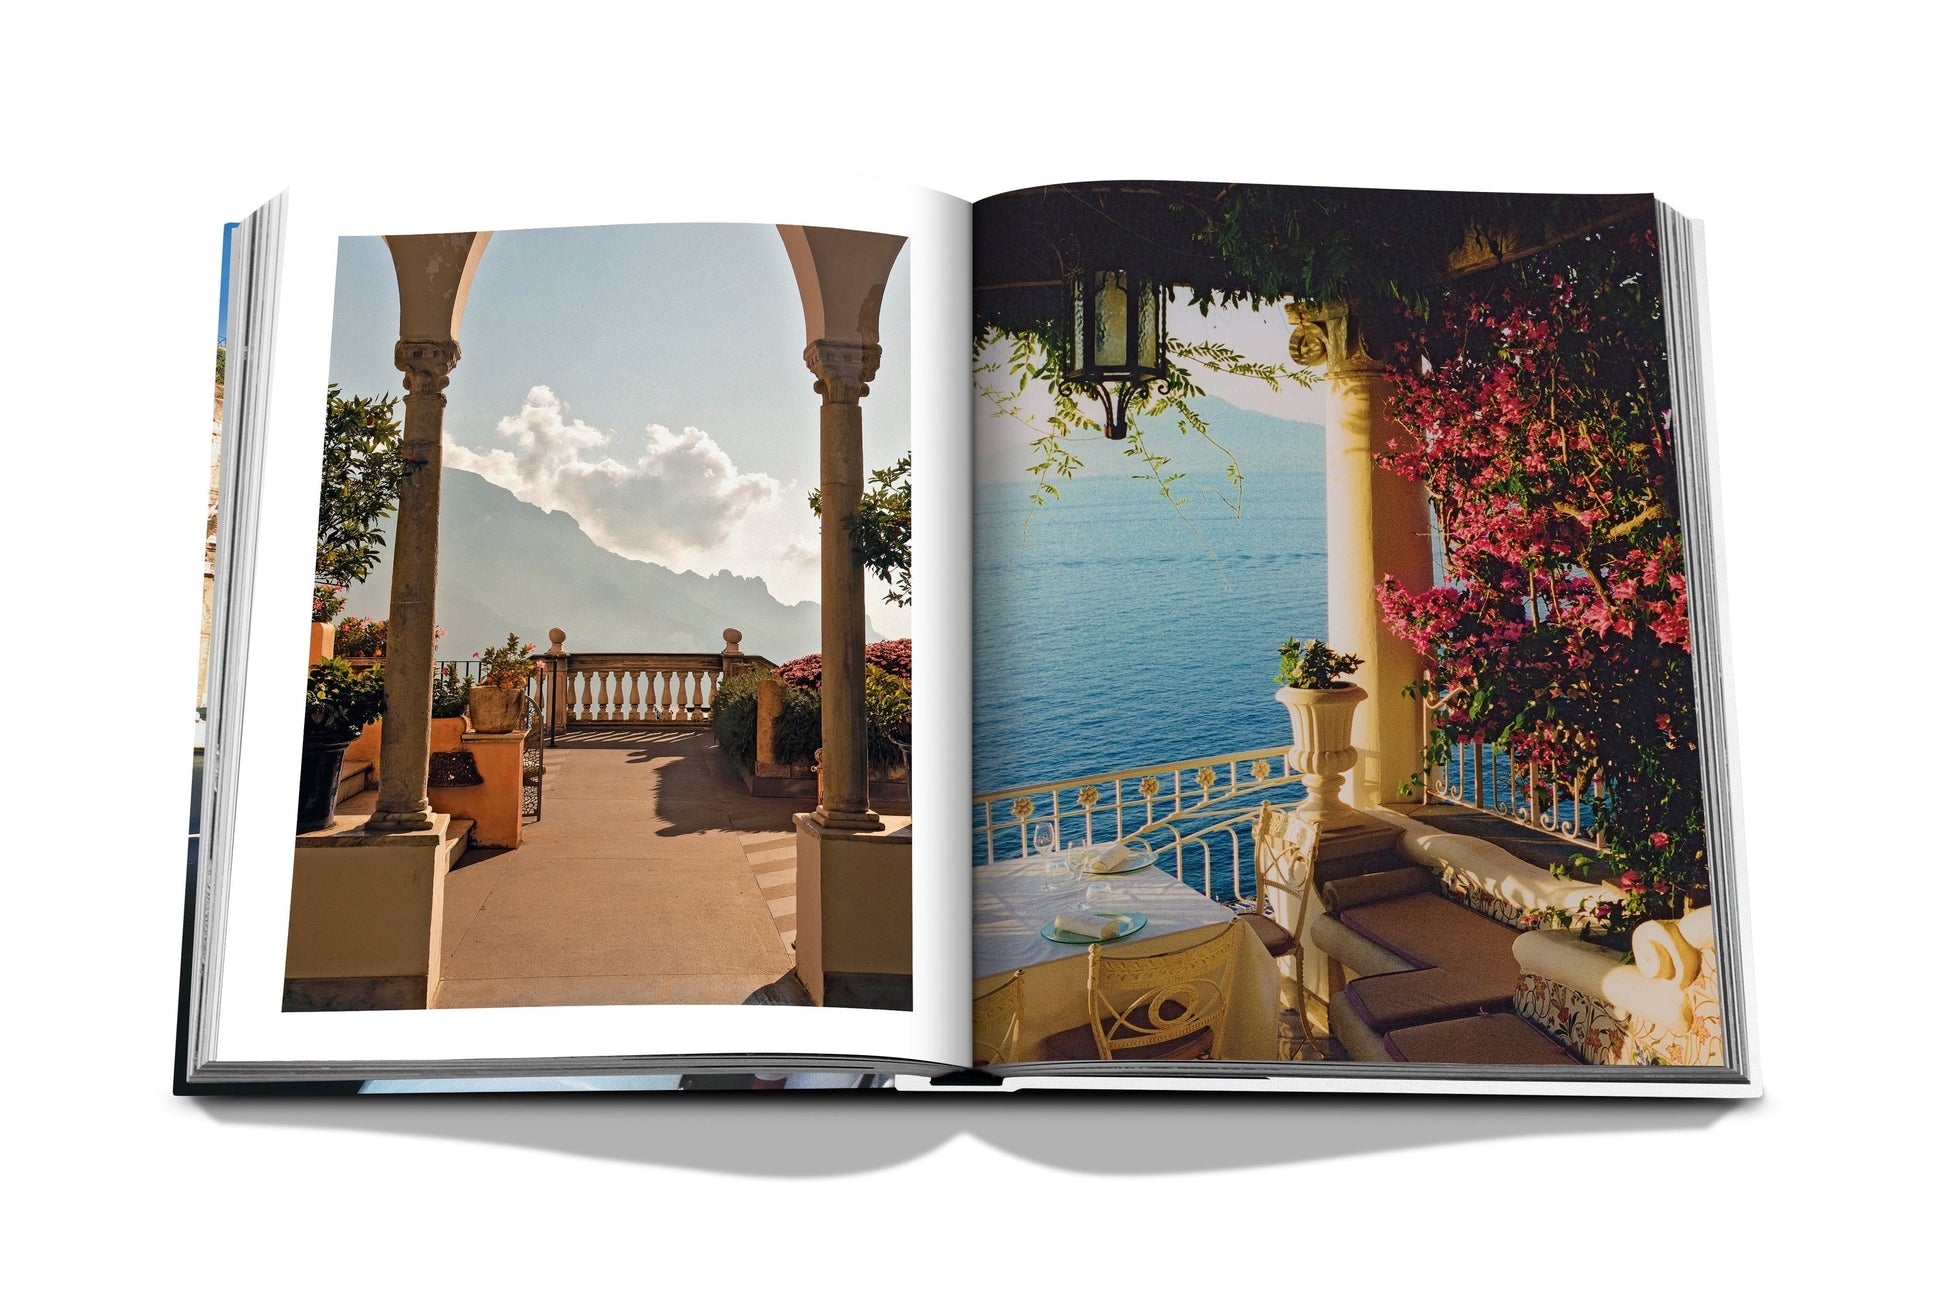 A book with a picture of a balcony overlooking the sea, capturing the beauty of Italy's Assouline lifestyle.